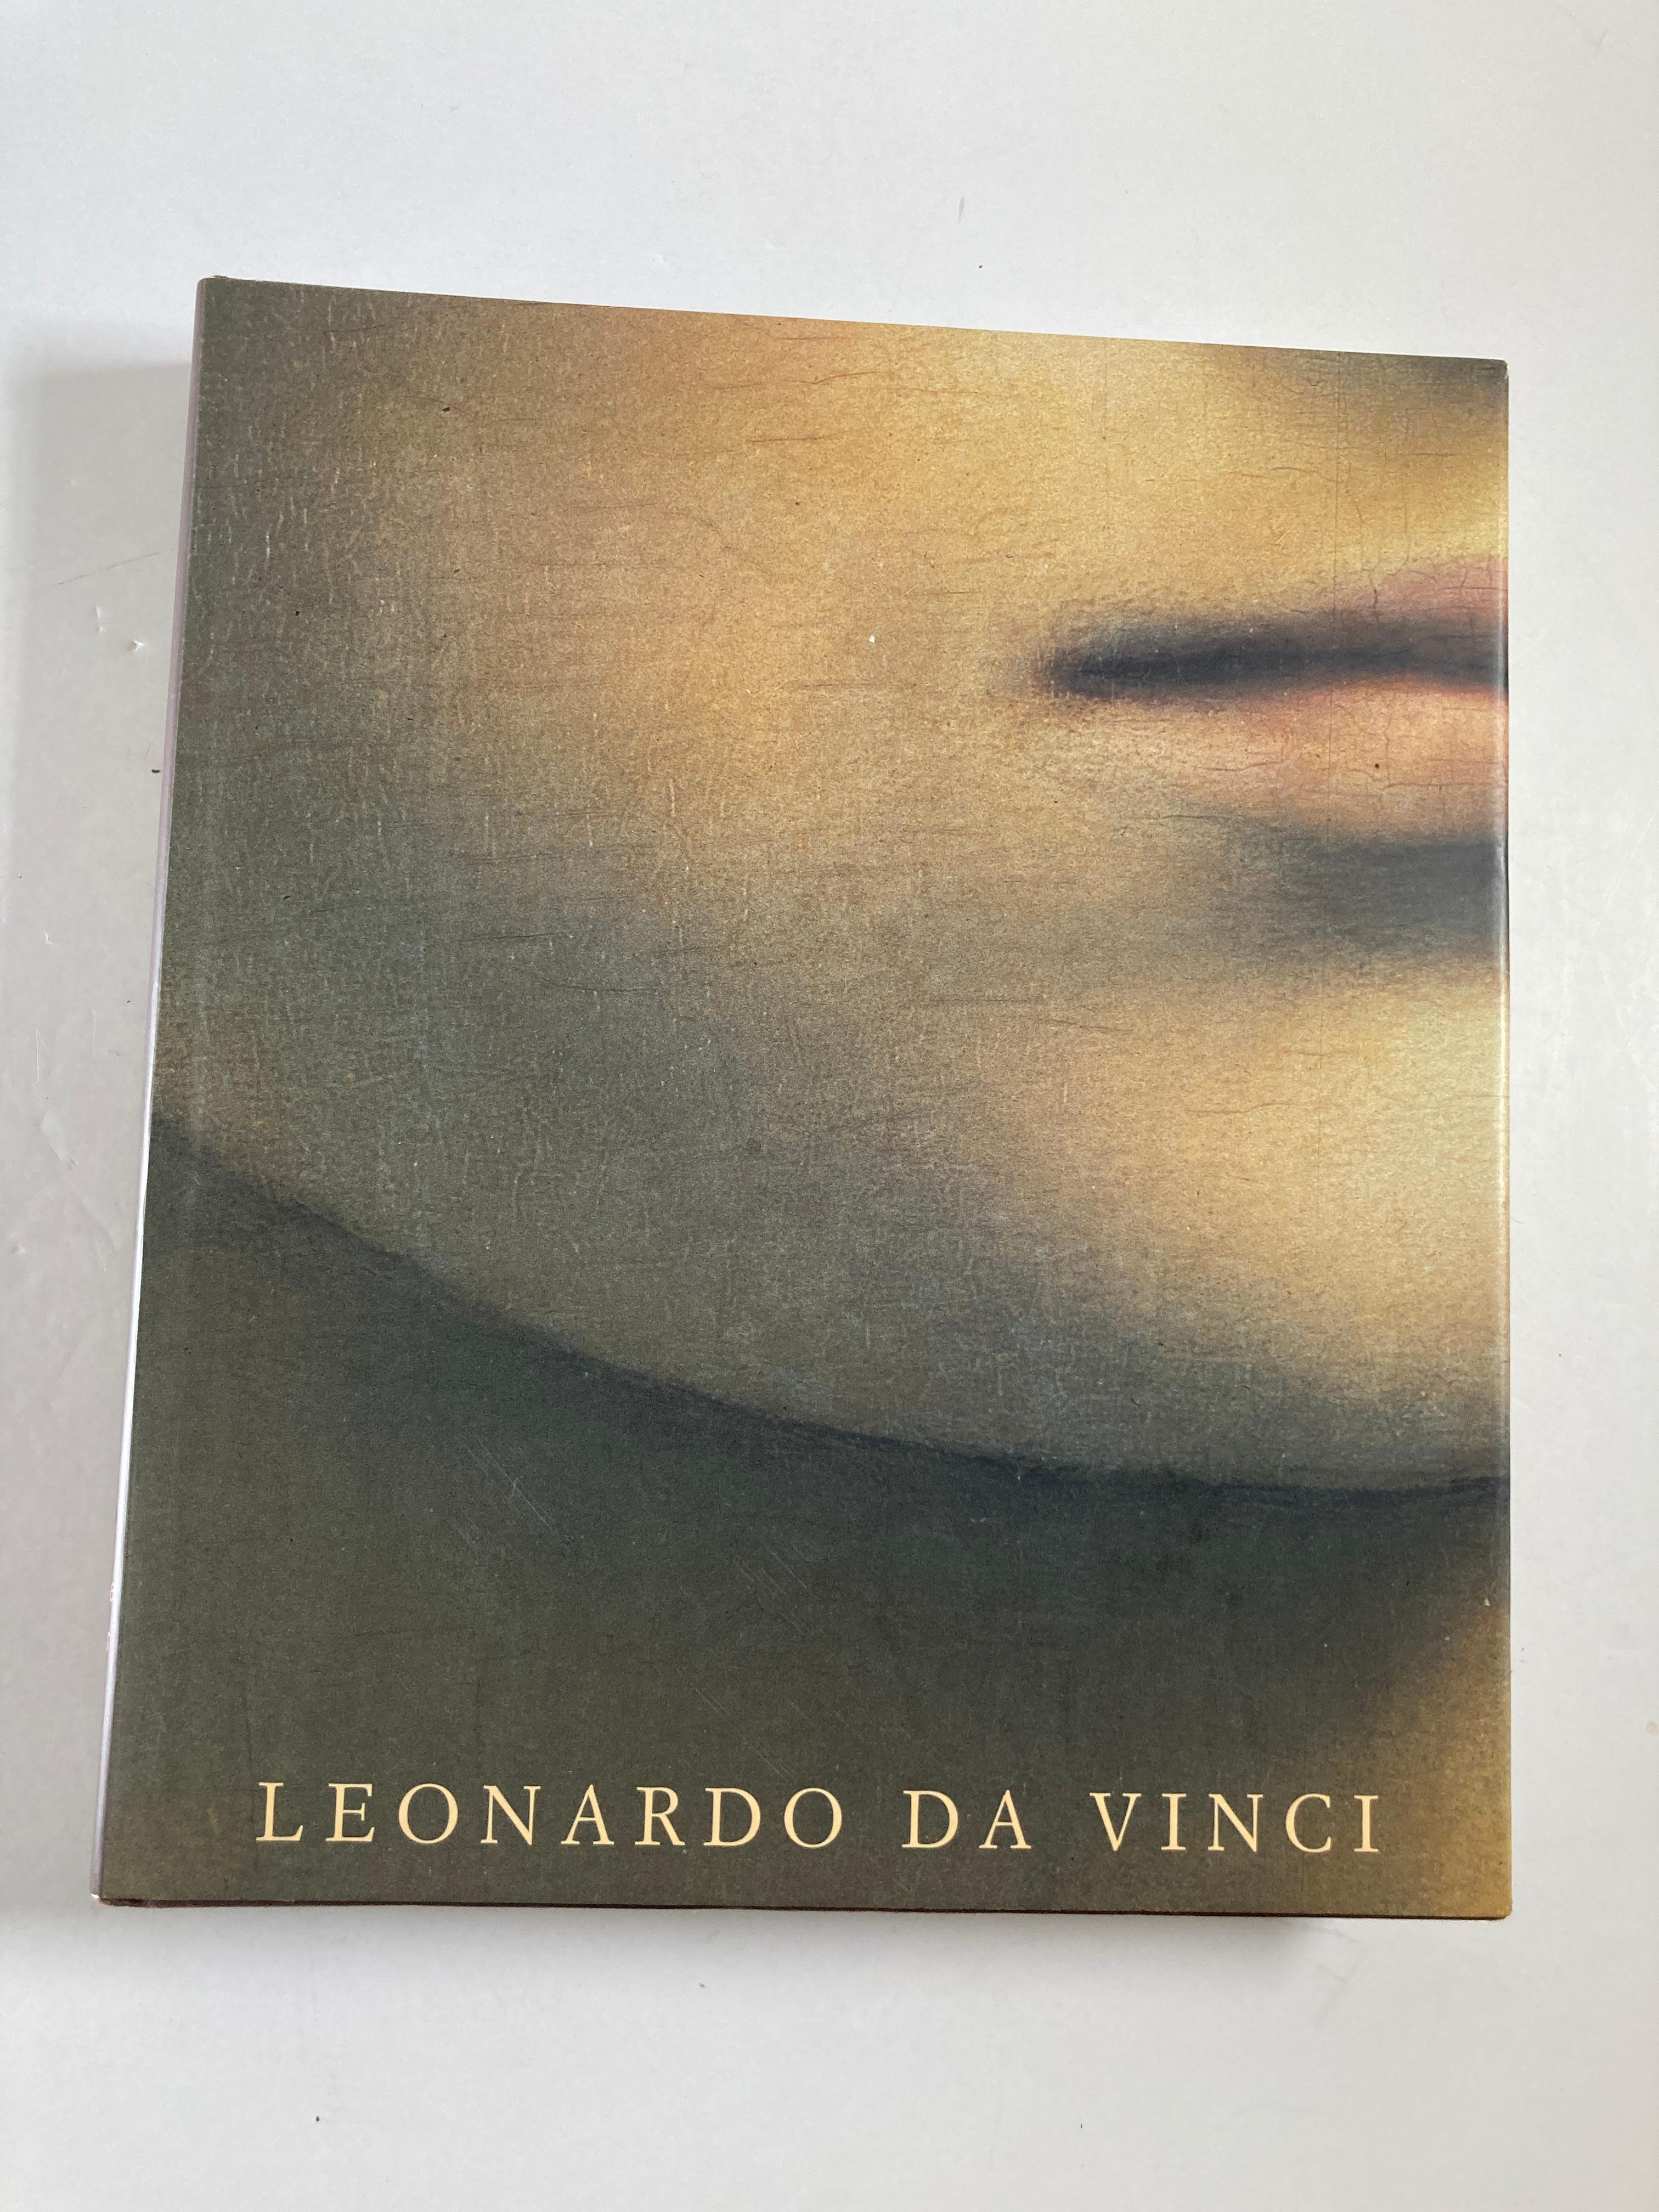 Leonardo da Vinci. The Complete Paintings.
Book by Pietro Marani
Da Vinci in detail: Leonardo's life and work all paintings.
One of the most fully achieved human beings who has ever lived, Leonardo da Vinci(1452 1519) is recognized the world over as